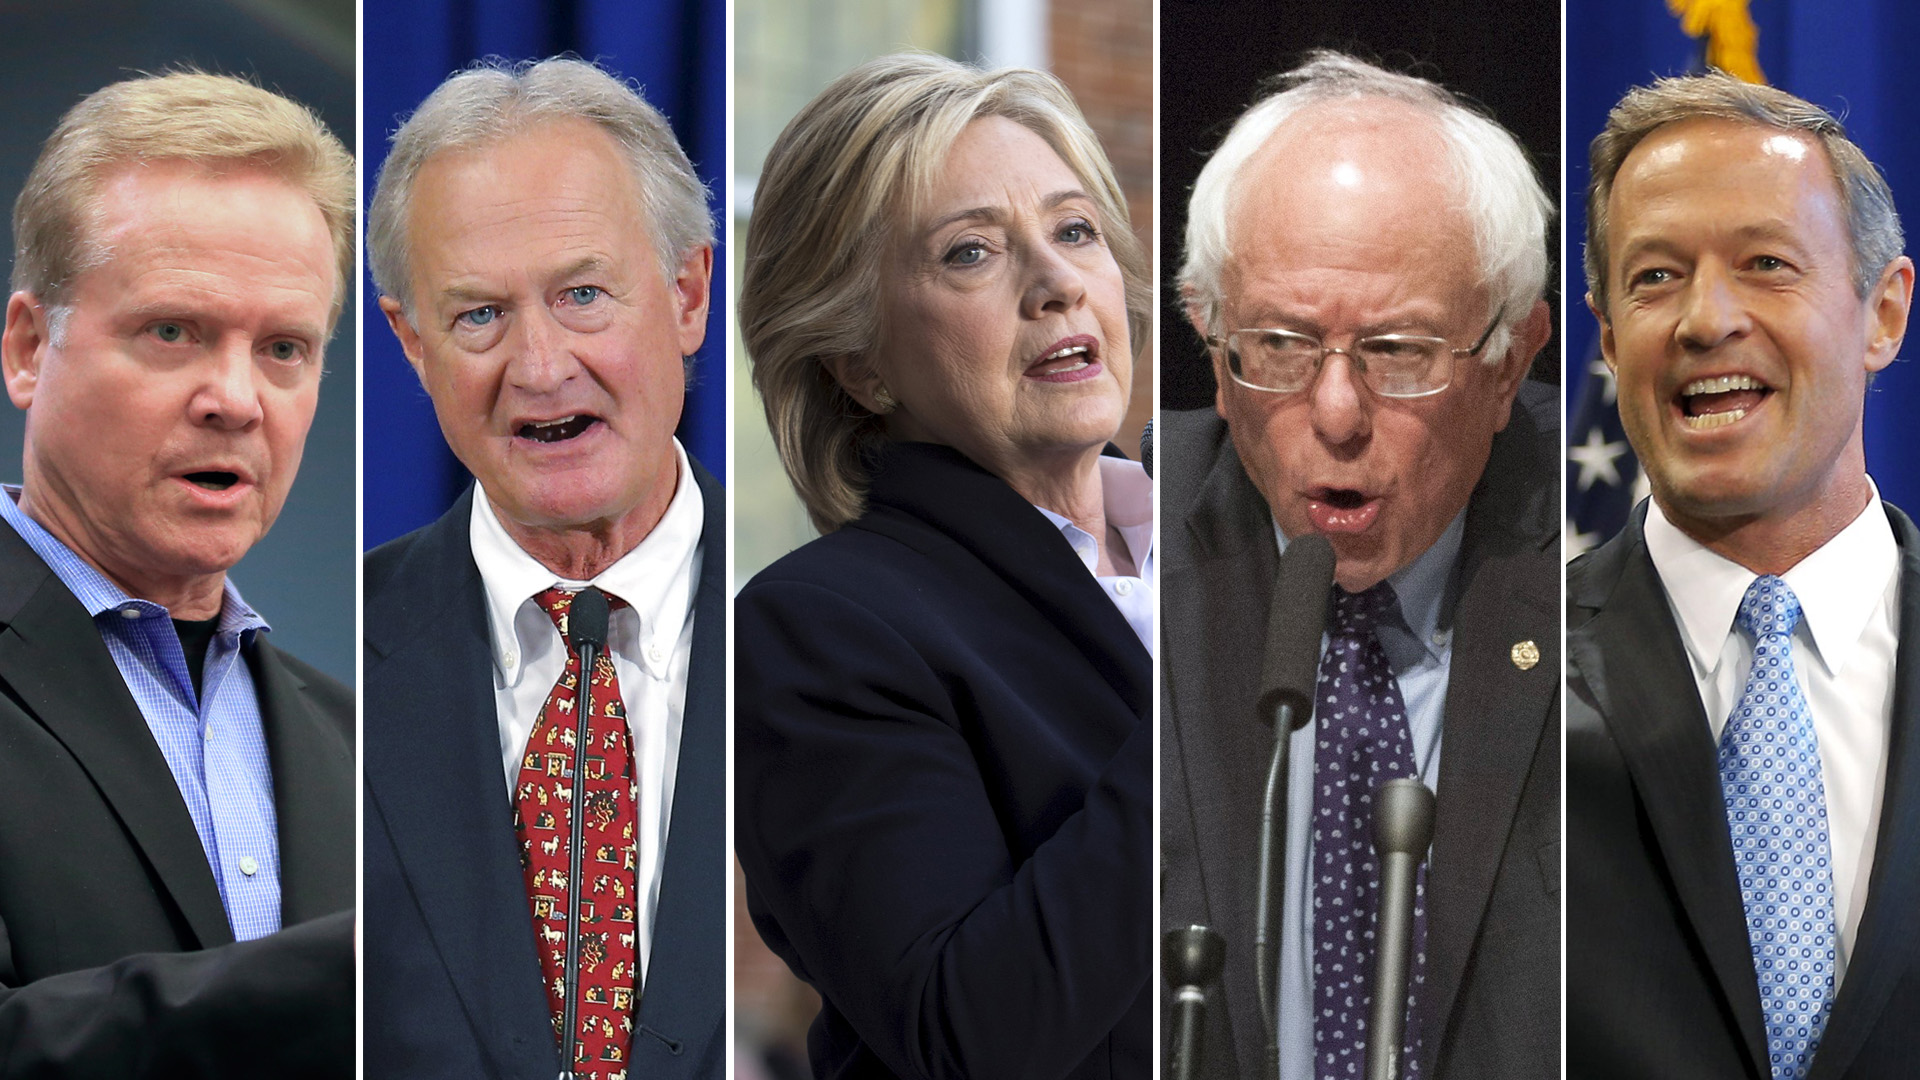 election-2016-what-s-at-stake-in-the-first-democratic-debate-cbs-news